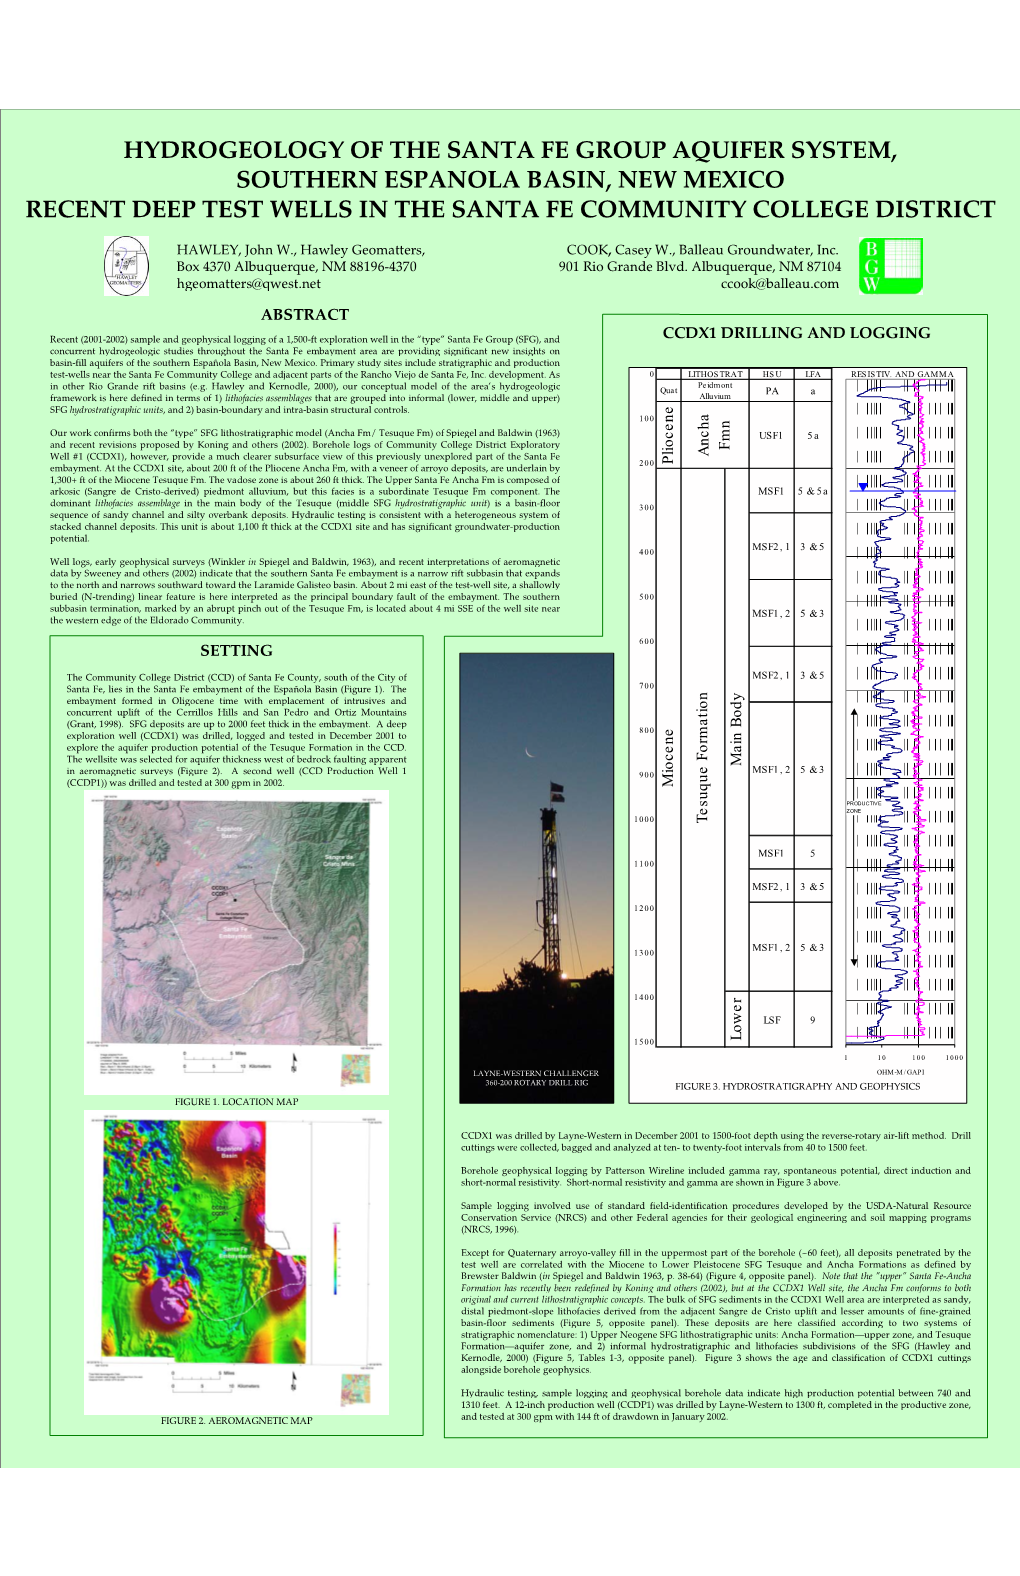 Hydrogeology of the Santa Fe Group Aquifer System, Southern Espanola Basin, New Mexico Recent Deep Test Wells in the Santa Fe Community College District